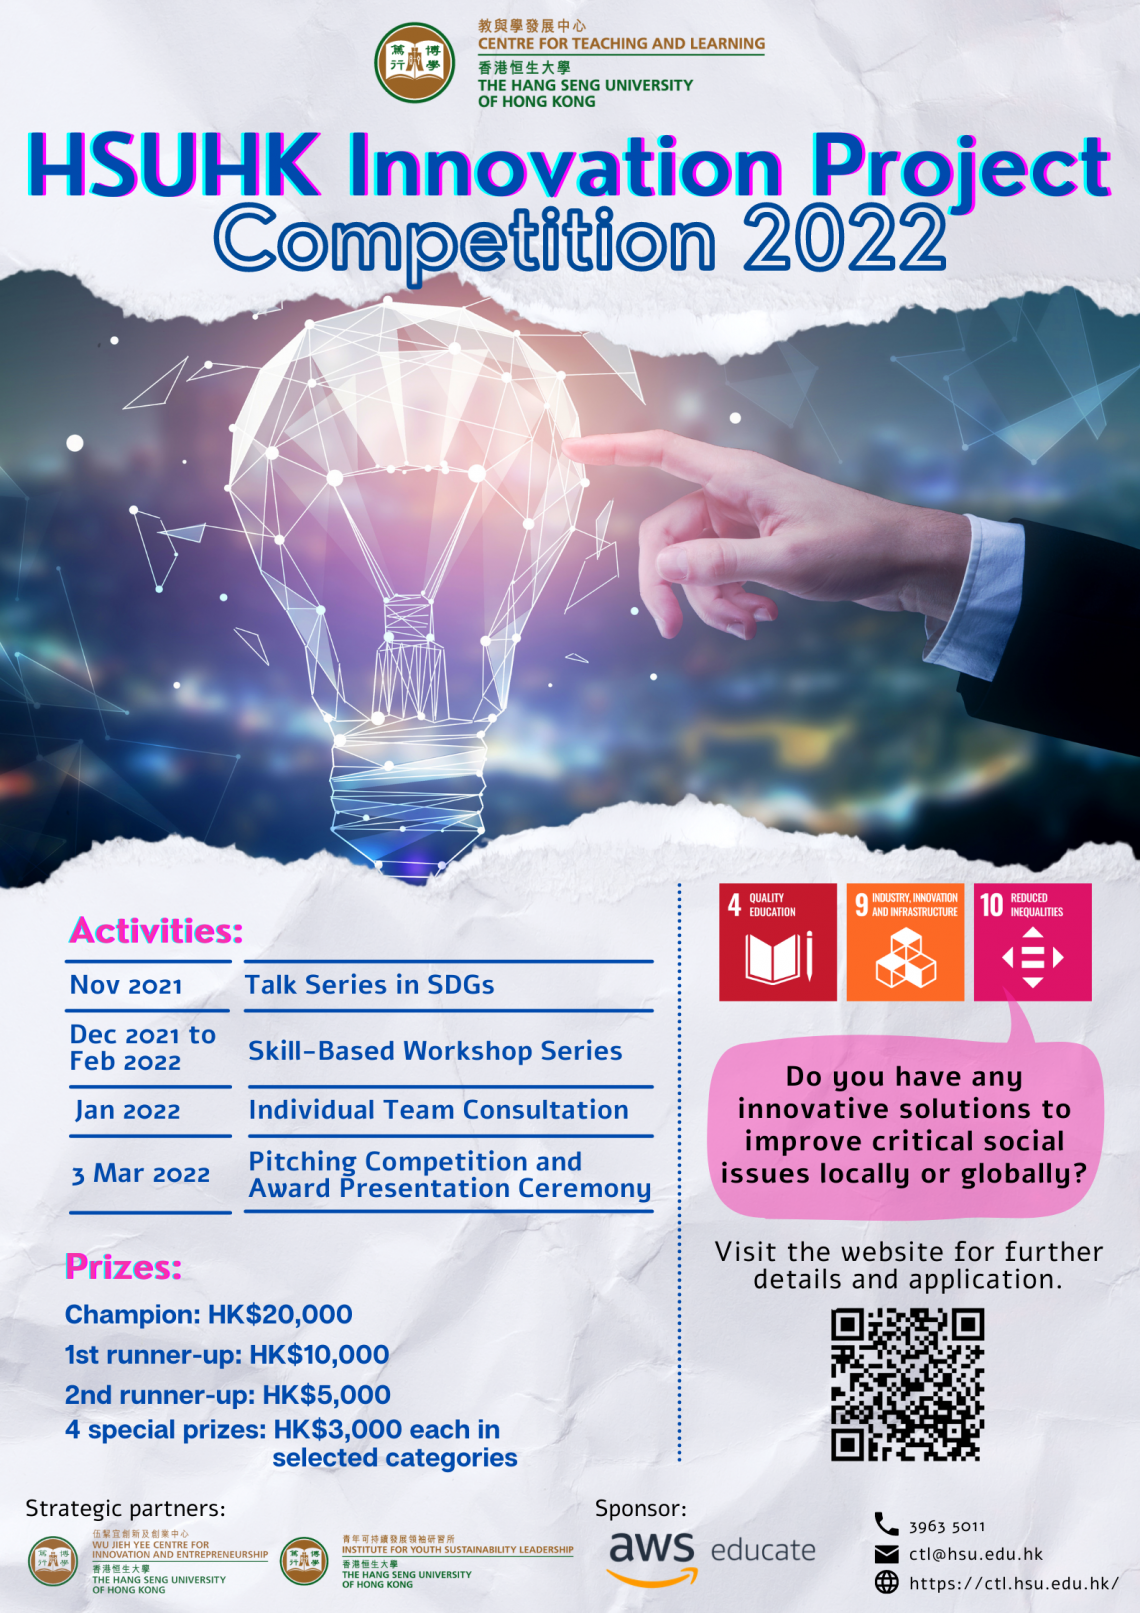 HSUHK Innovation Project Competition 2022